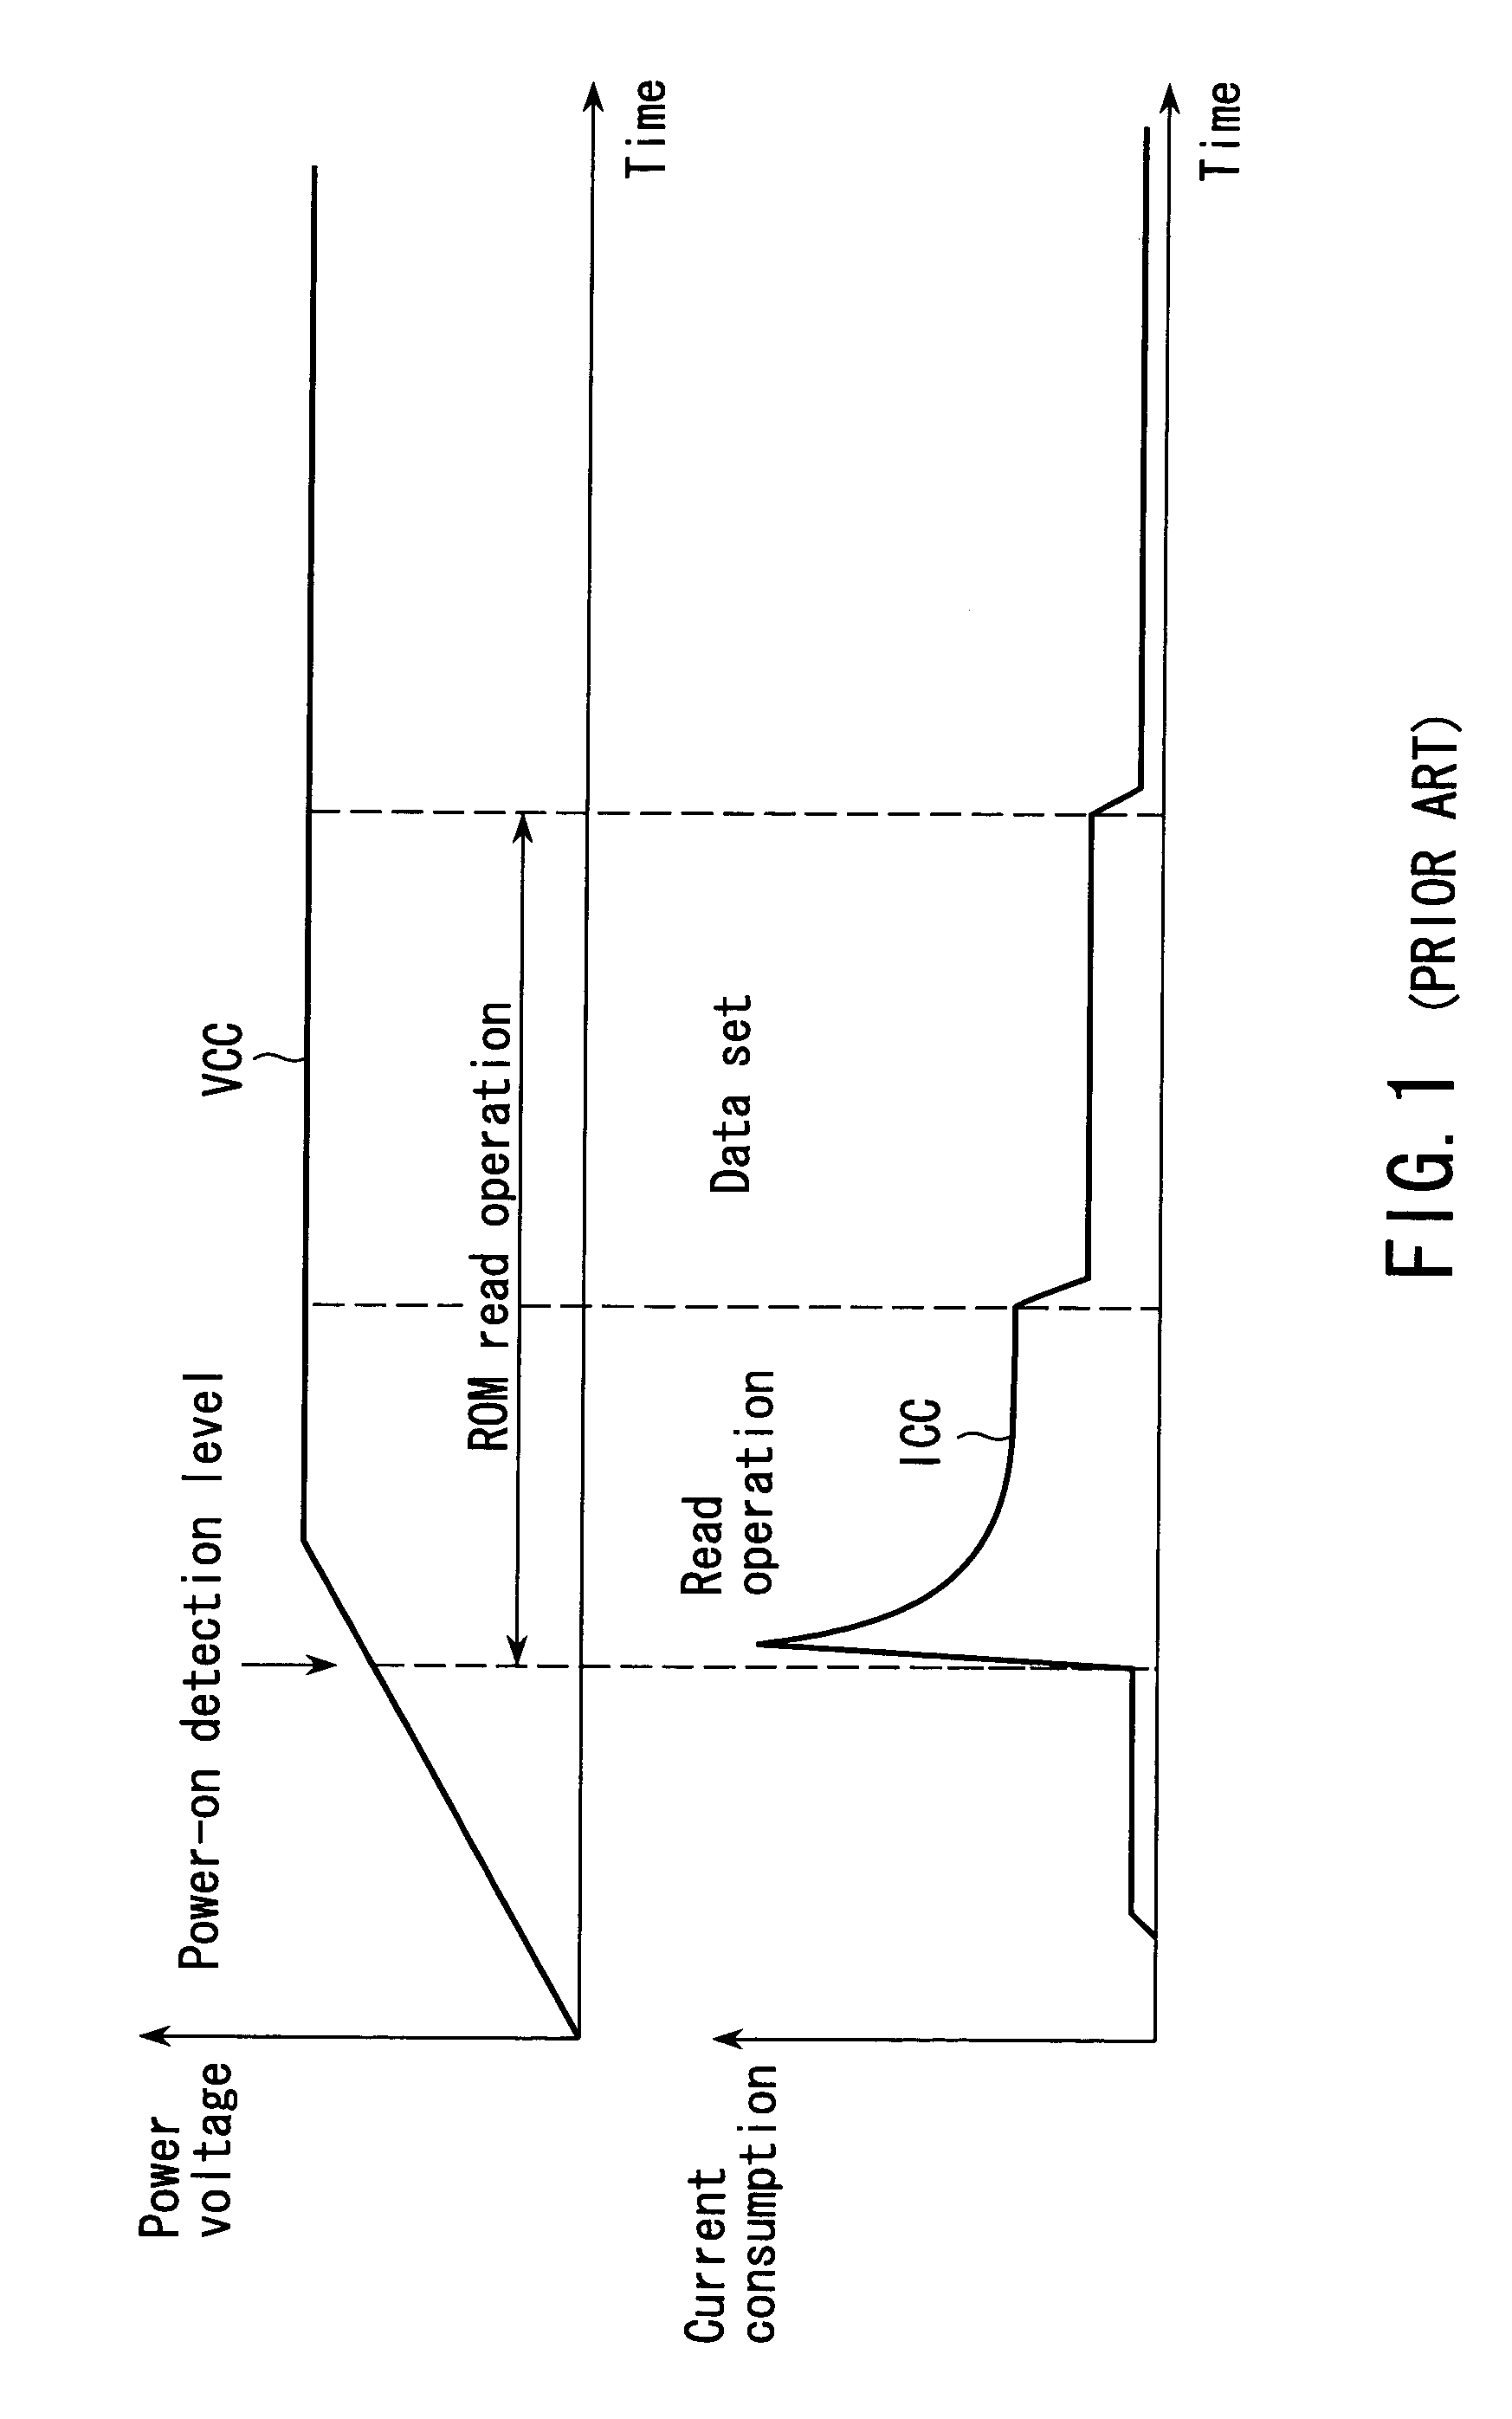 Non-volatile semiconductor storage device performing ROM read operation upon power-on